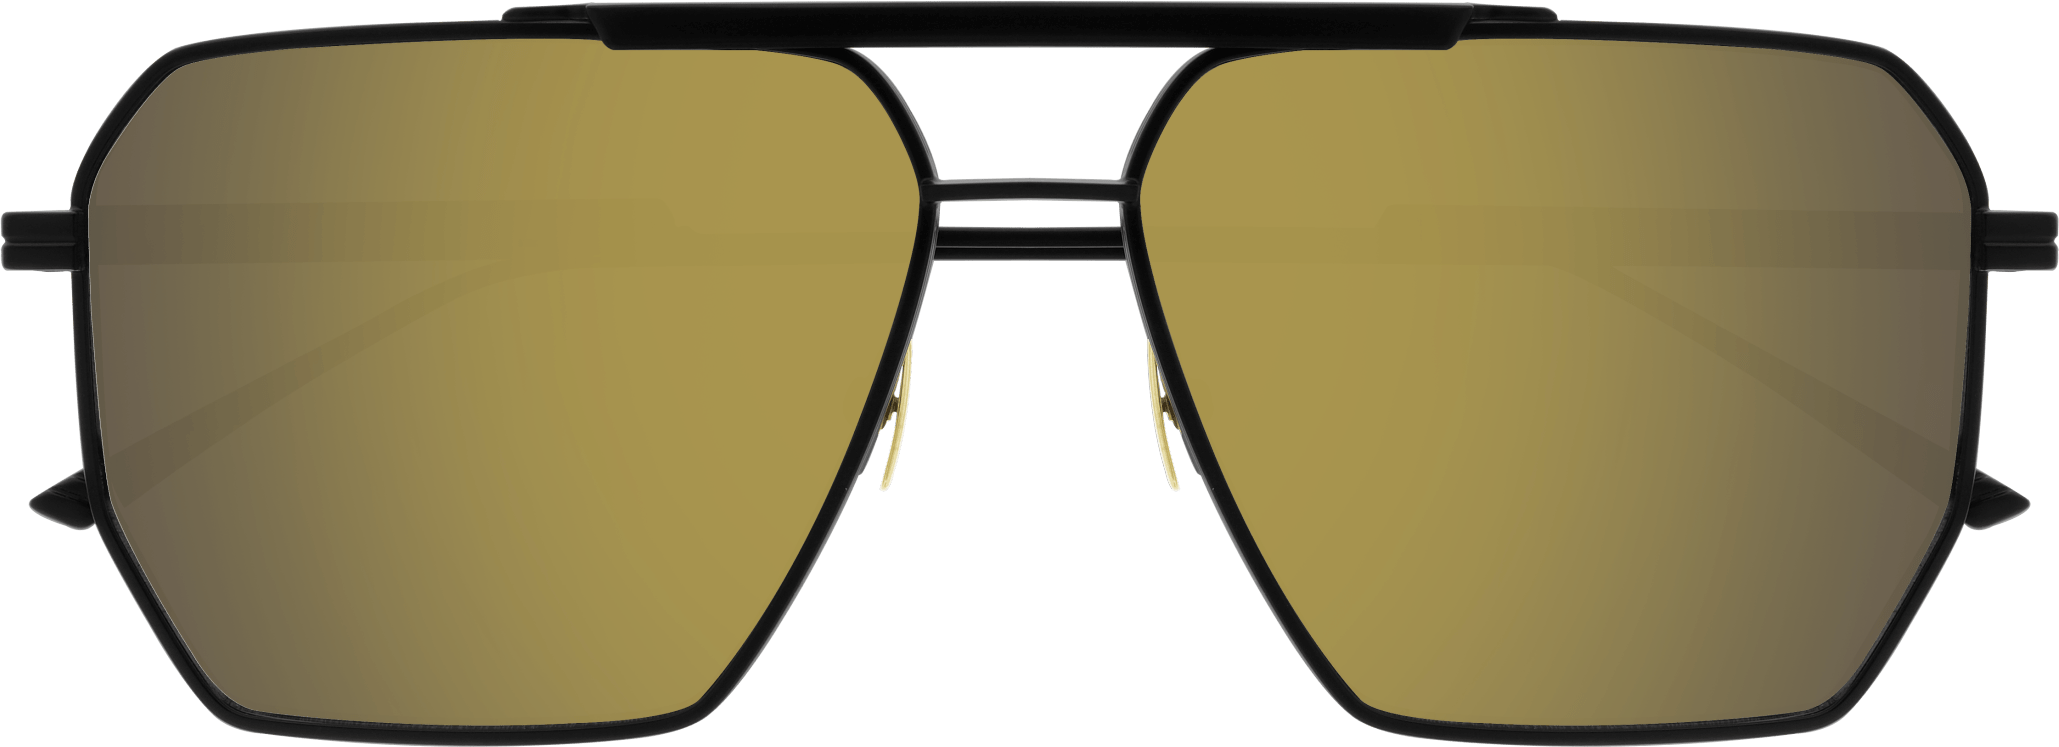 Color_BV1012S-002 - BLACK - GOLD - MIRROR(DOUBLE)